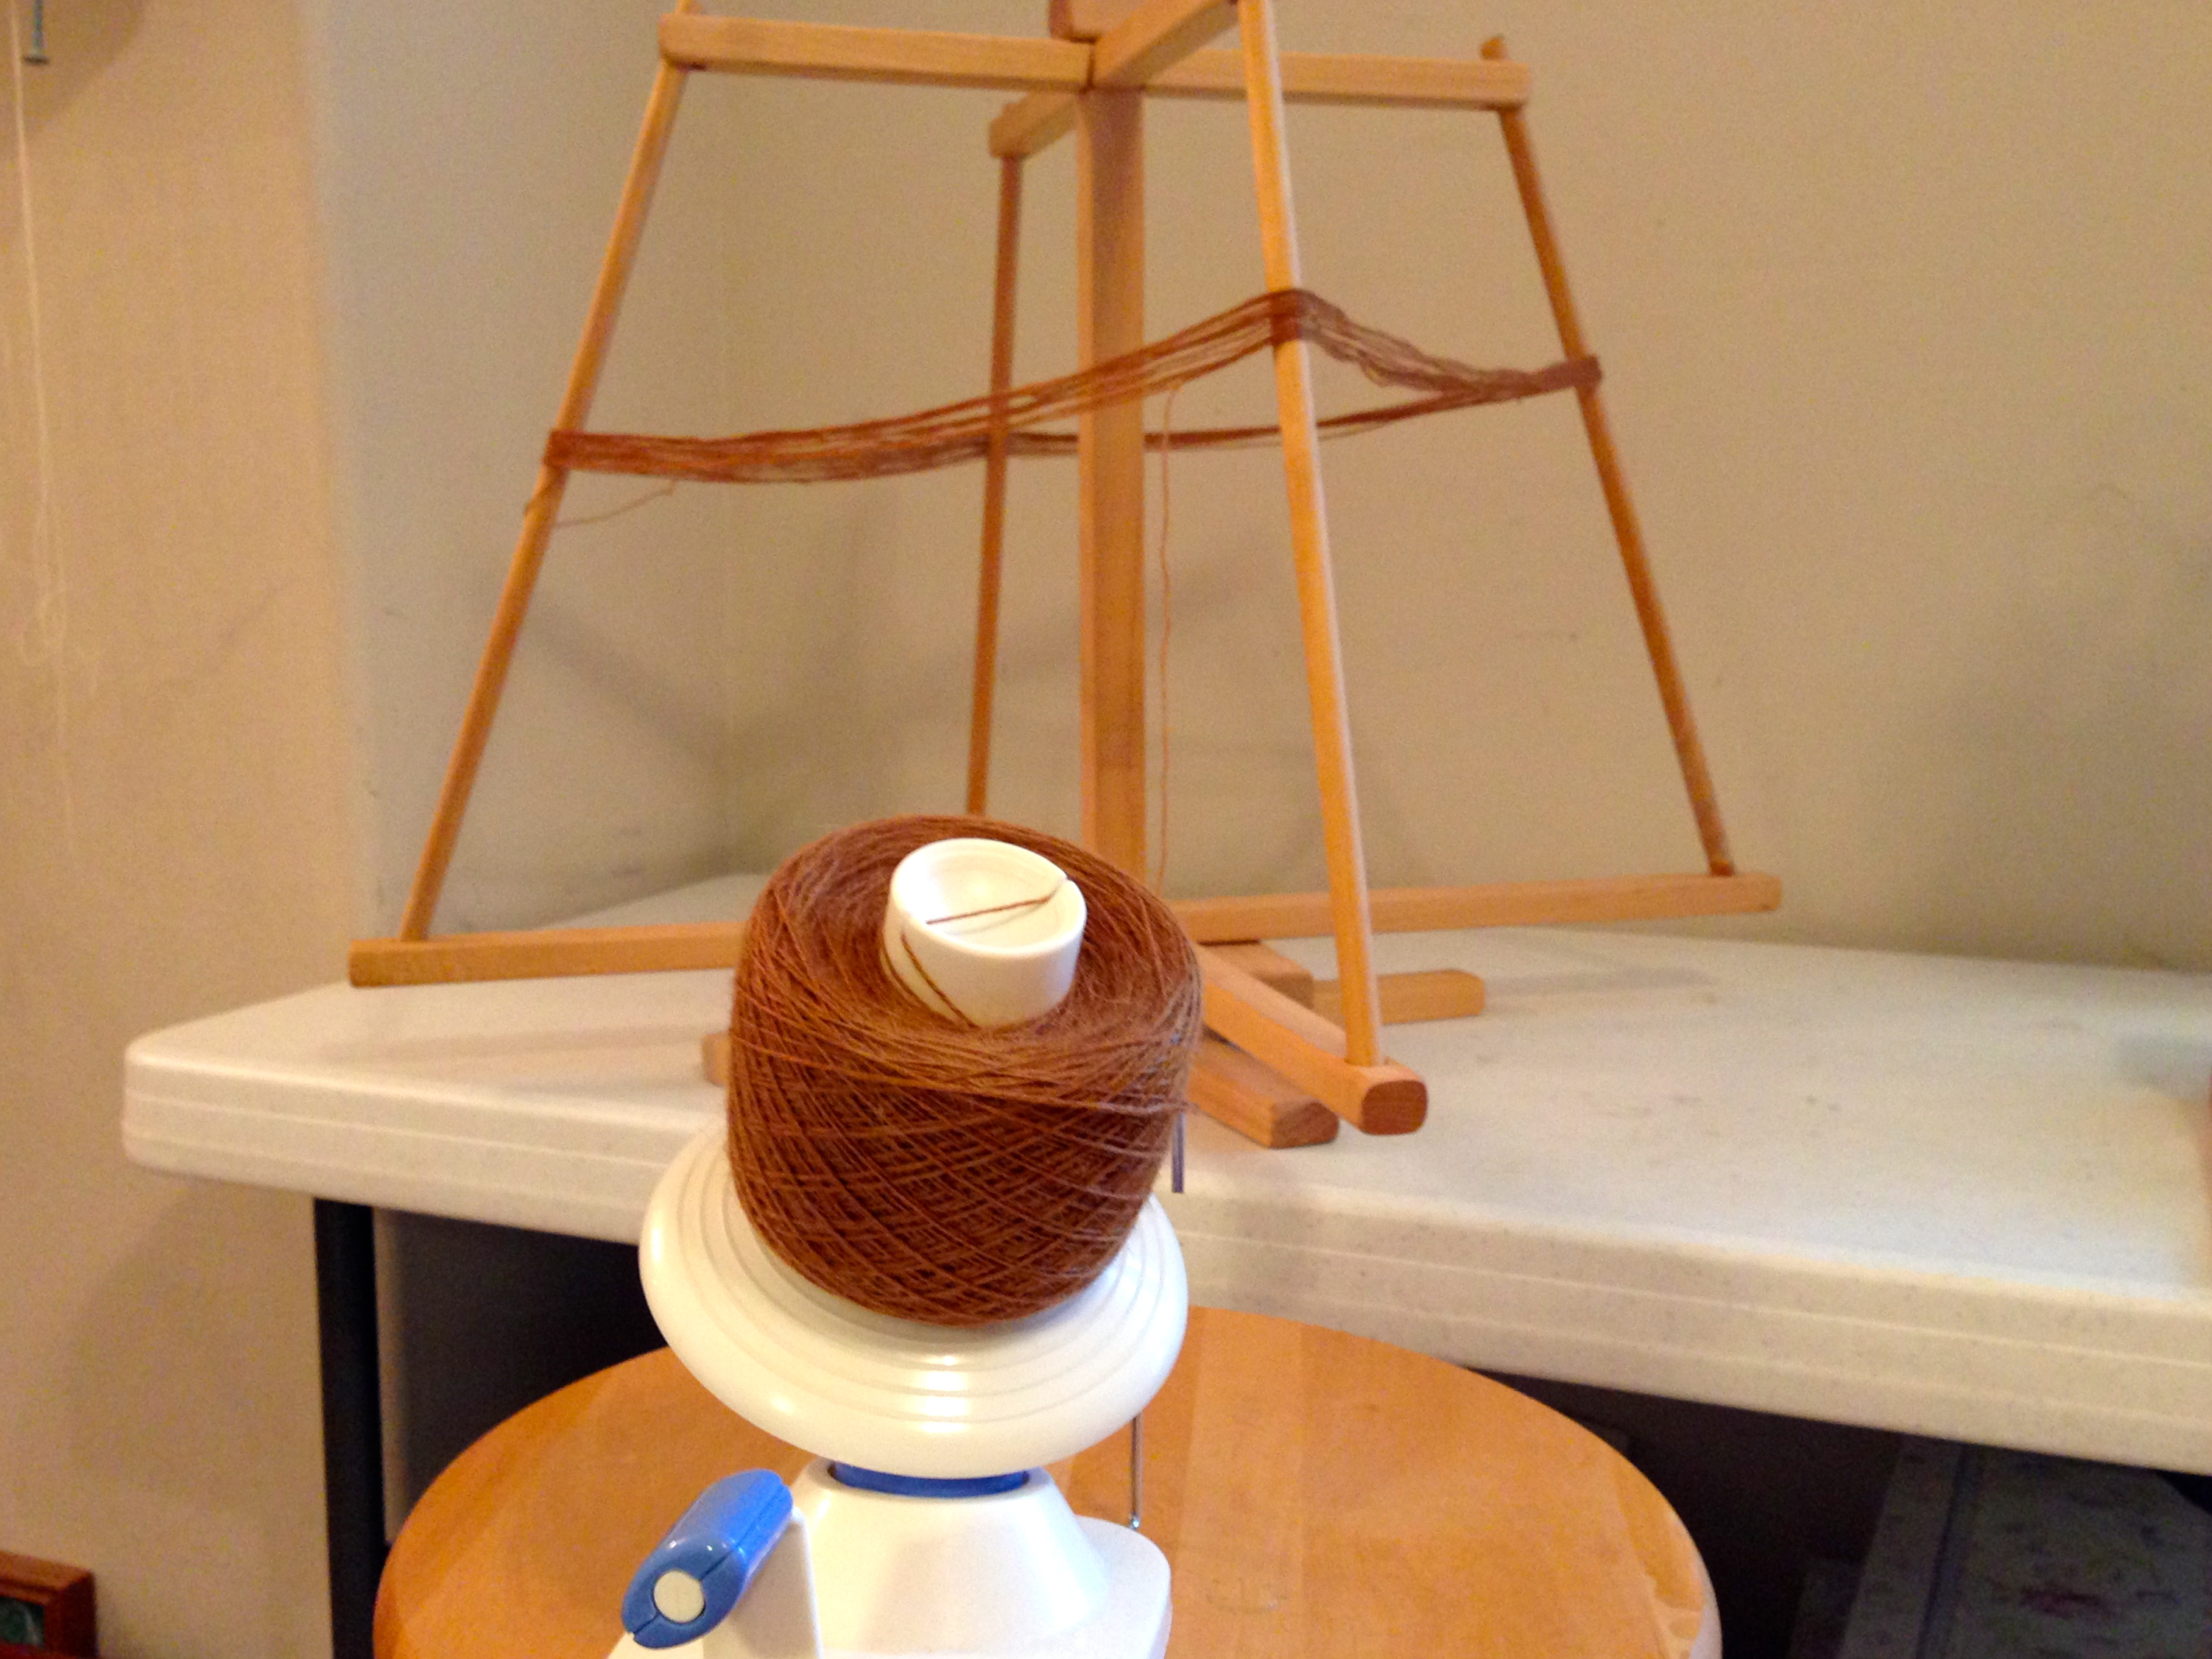 How to wind yarn using a swift and ball winder